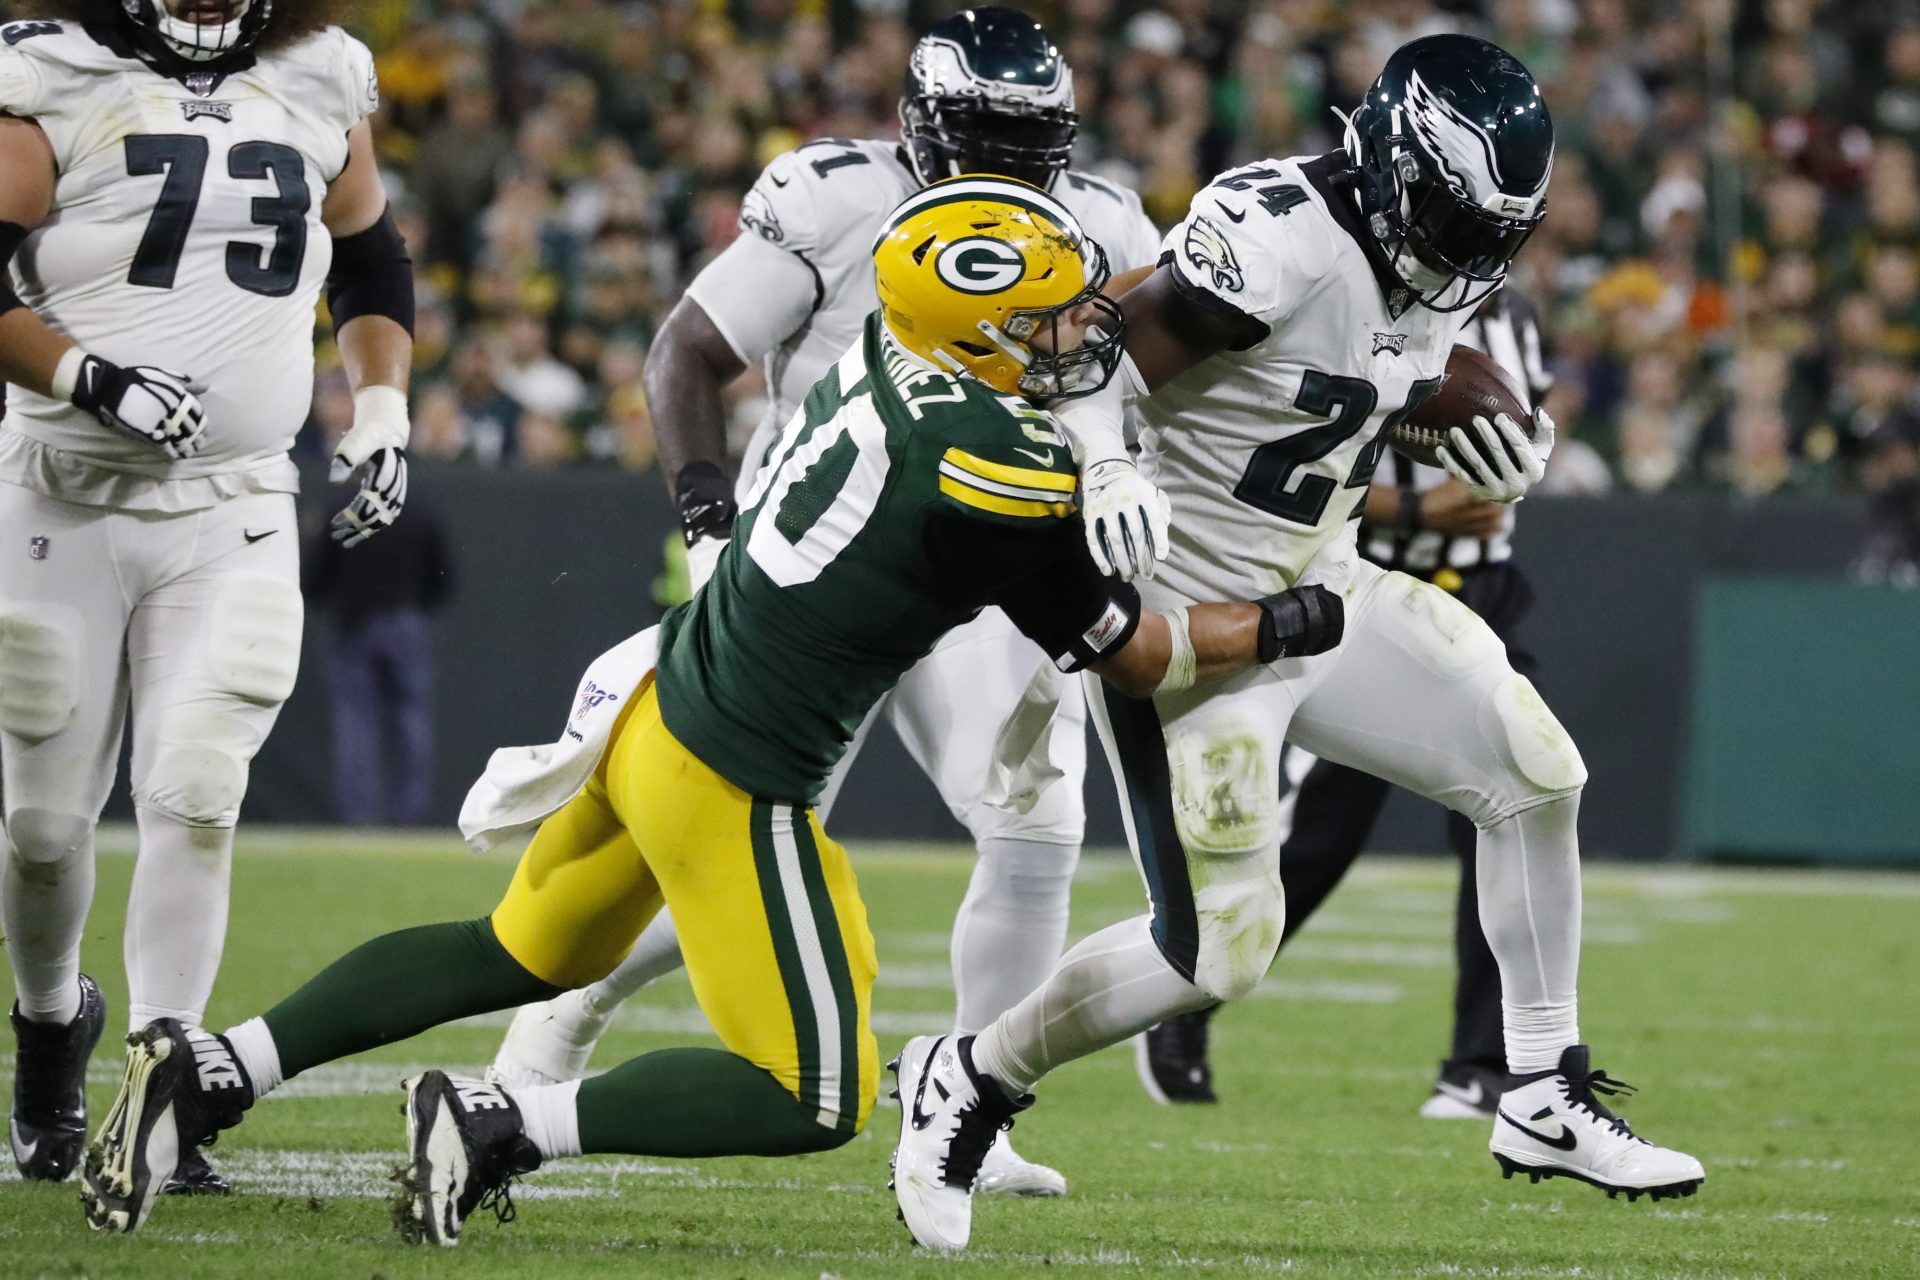 Philadelphia Eagles running back Jordan Howard runs after making a catch and breaks the tackle of Green Bay Packers inside linebacker Blake Martinez during the second half of an NFL football game Thursday, Sept. 26, 2019, in Green Bay, Wis.